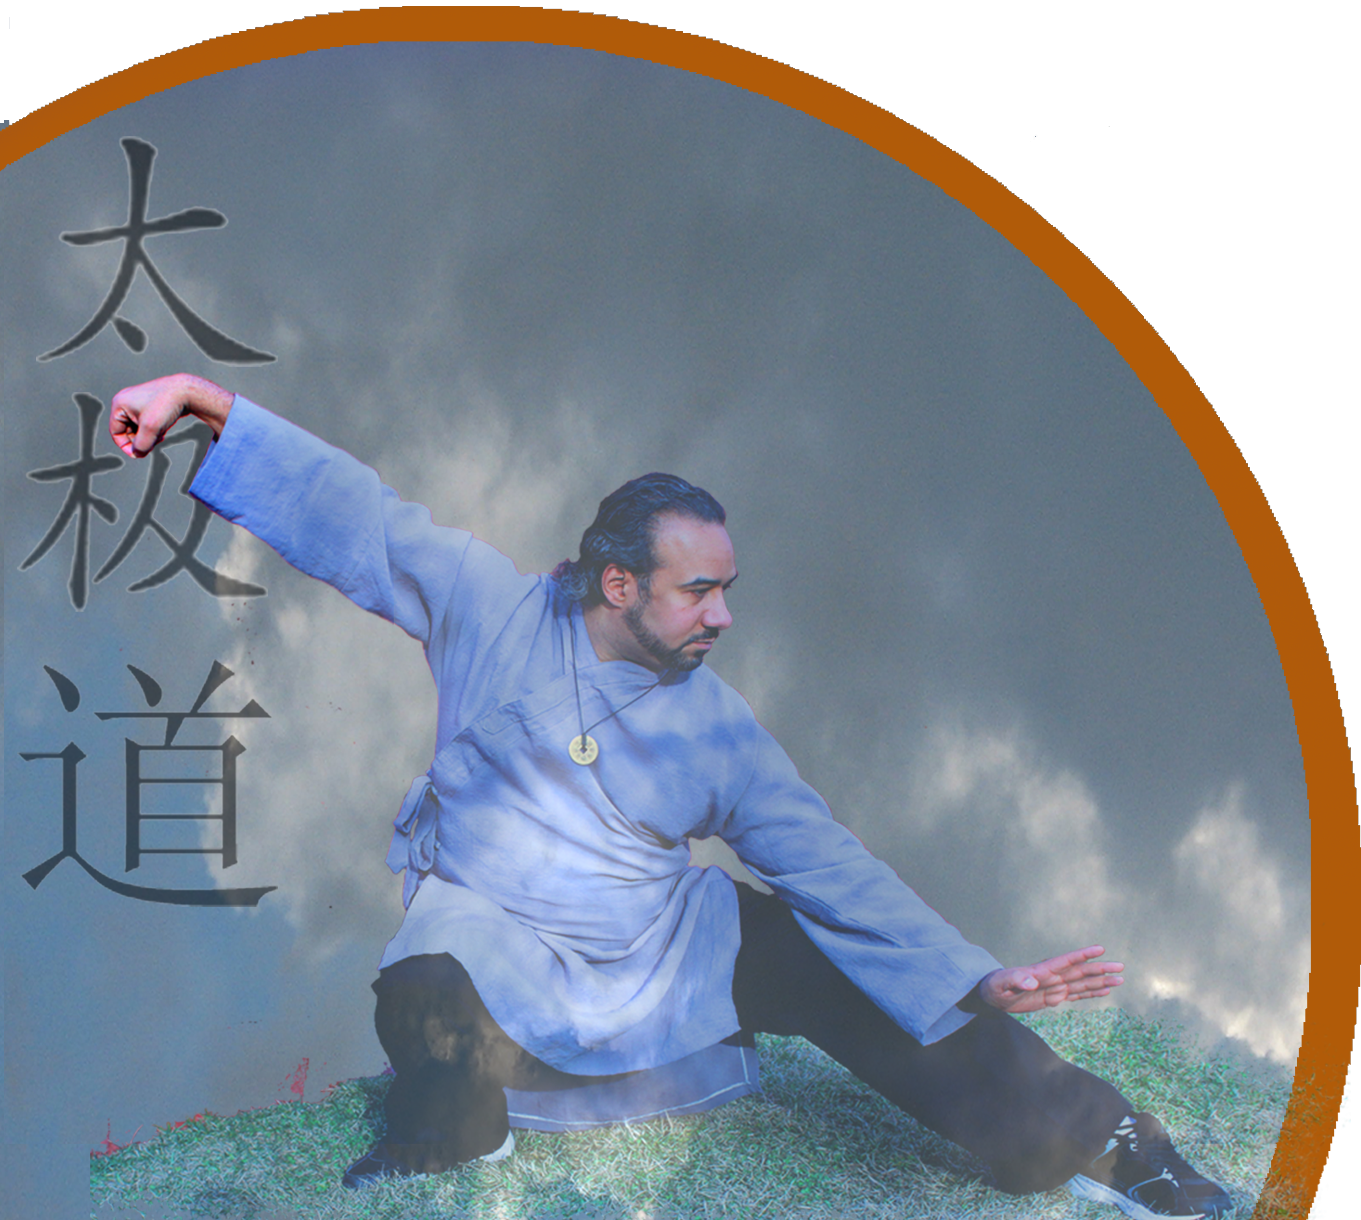 Marc practices the technique of Snake Creeps Down from the Yang TaiJiQuan (Tai Chi Chuan) Long Form in Pittsburgh Pennsylvania.